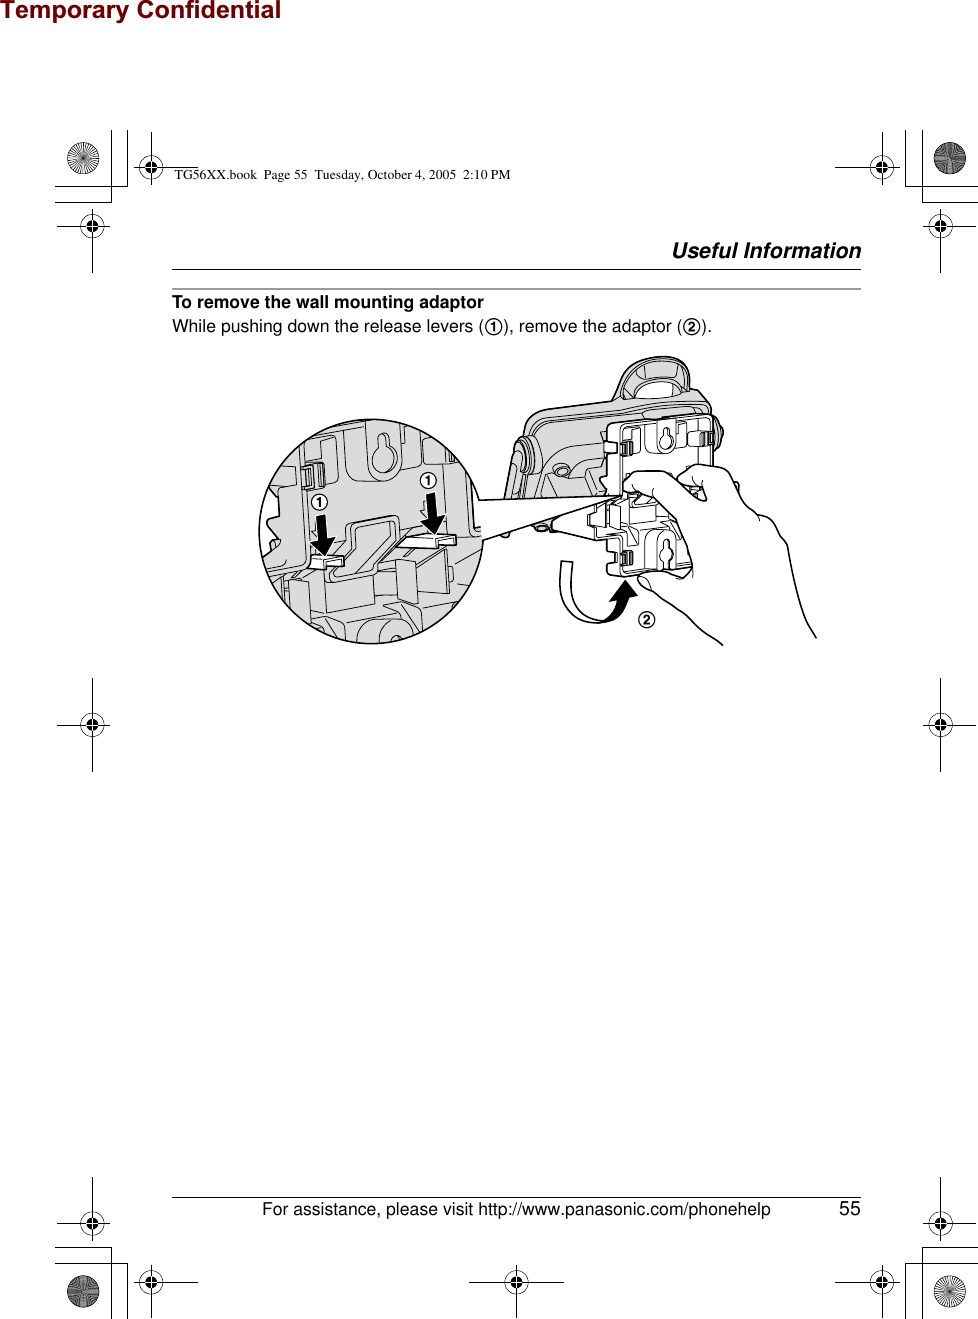 Temporary ConfidentialUseful InformationFor assistance, please visit http://www.panasonic.com/phonehelp 55To remove the wall mounting adaptorWhile pushing down the release levers (1), remove the adaptor (2).2TG56XX.book  Page 55  Tuesday, October 4, 2005  2:10 PM